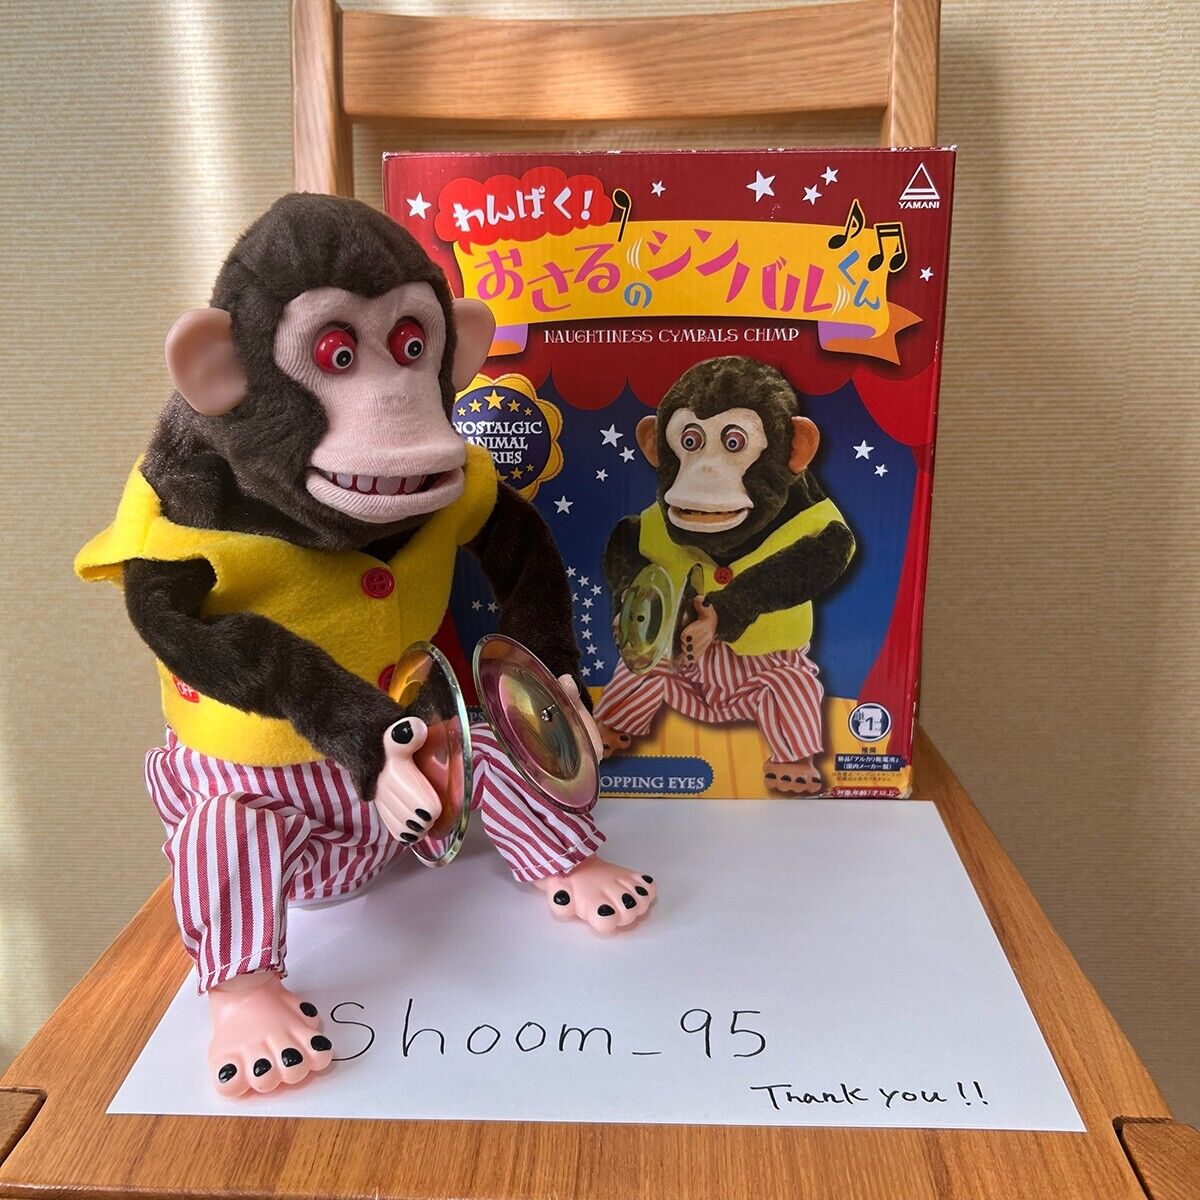 YAMANI Toy Story Musical Jolly Chimp Monkey Naughtiness Cymbals Brown from Japan